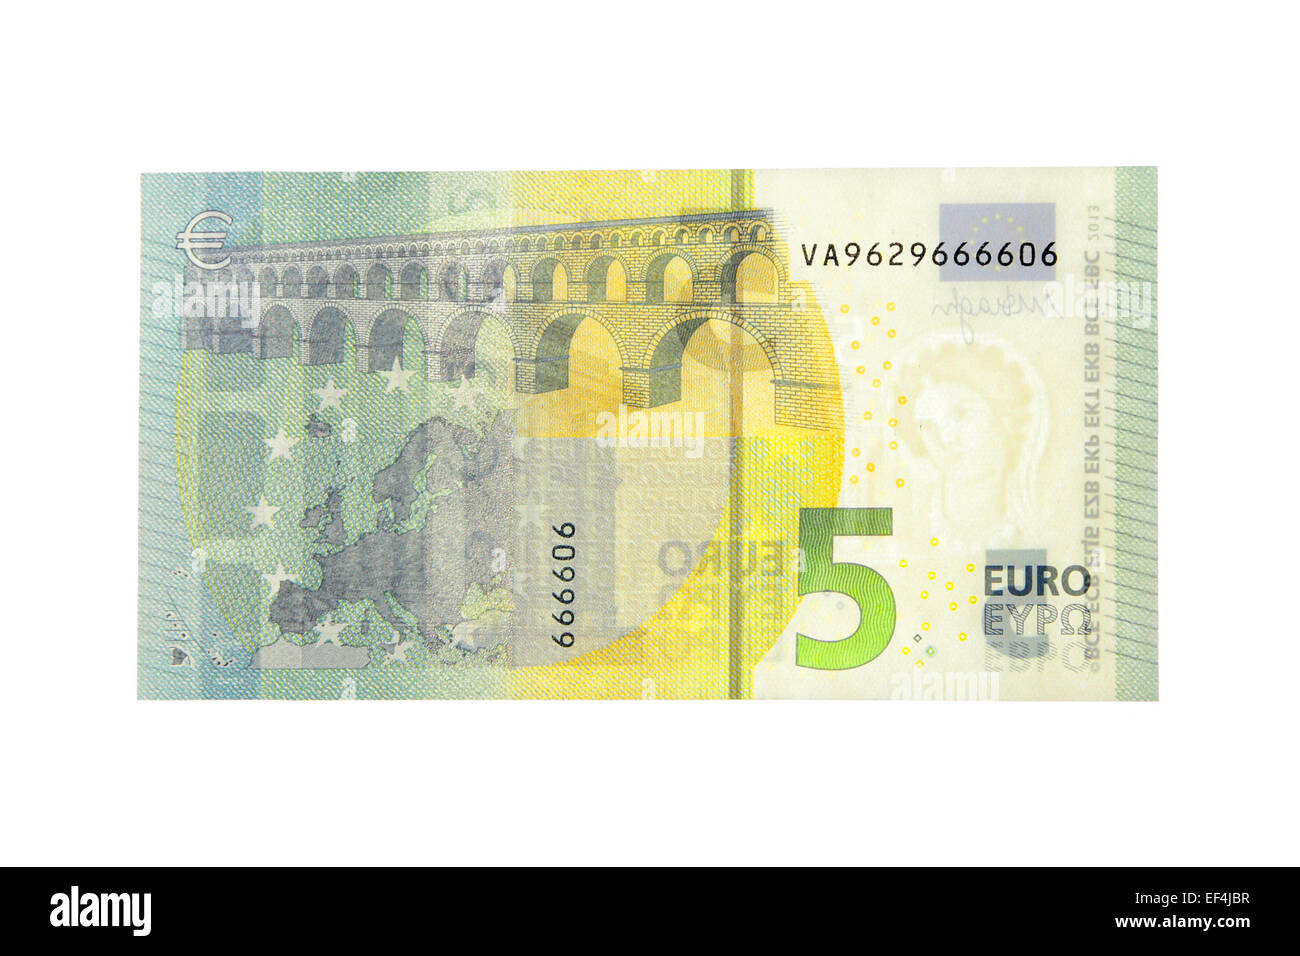 lfive 5 euro change money economy monetary european union global future conversion active currency banknote greenback paper new Stock Photo